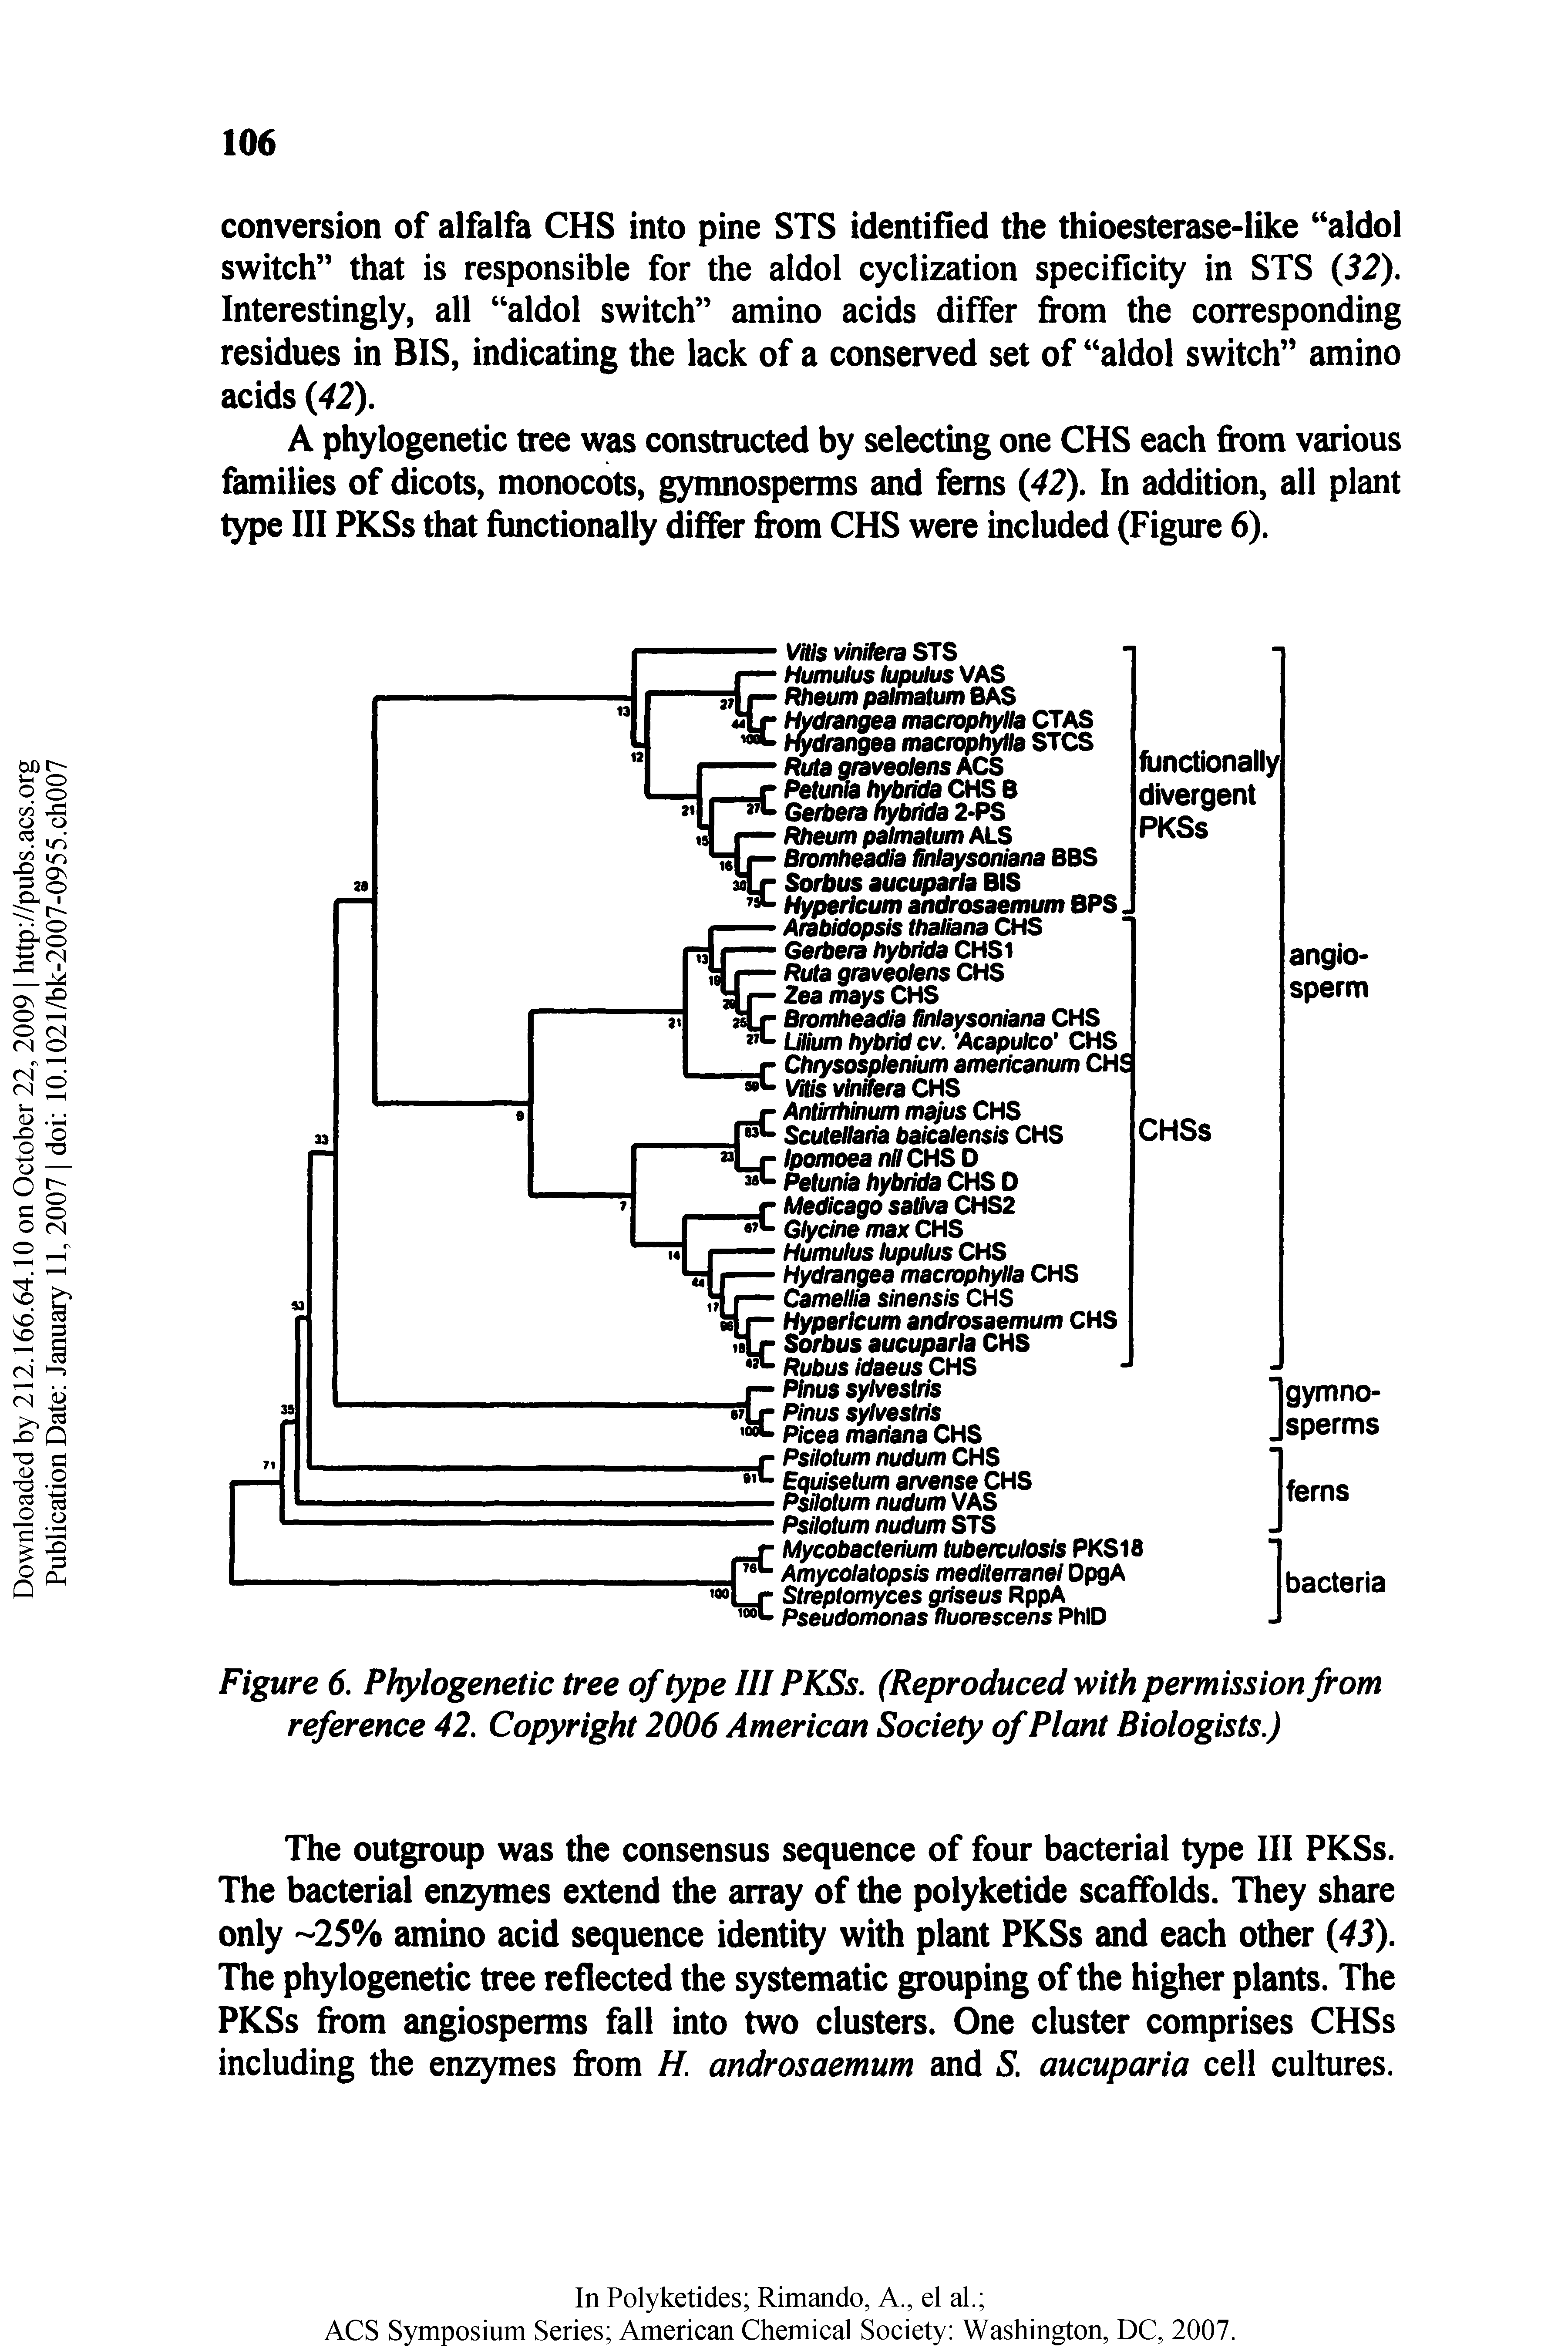 Figure 6. Phylogenetic tree of type III PKSs. (Reproduced with permission from reference 42. Copyright 2006 American Society of Plant Biologists.)...